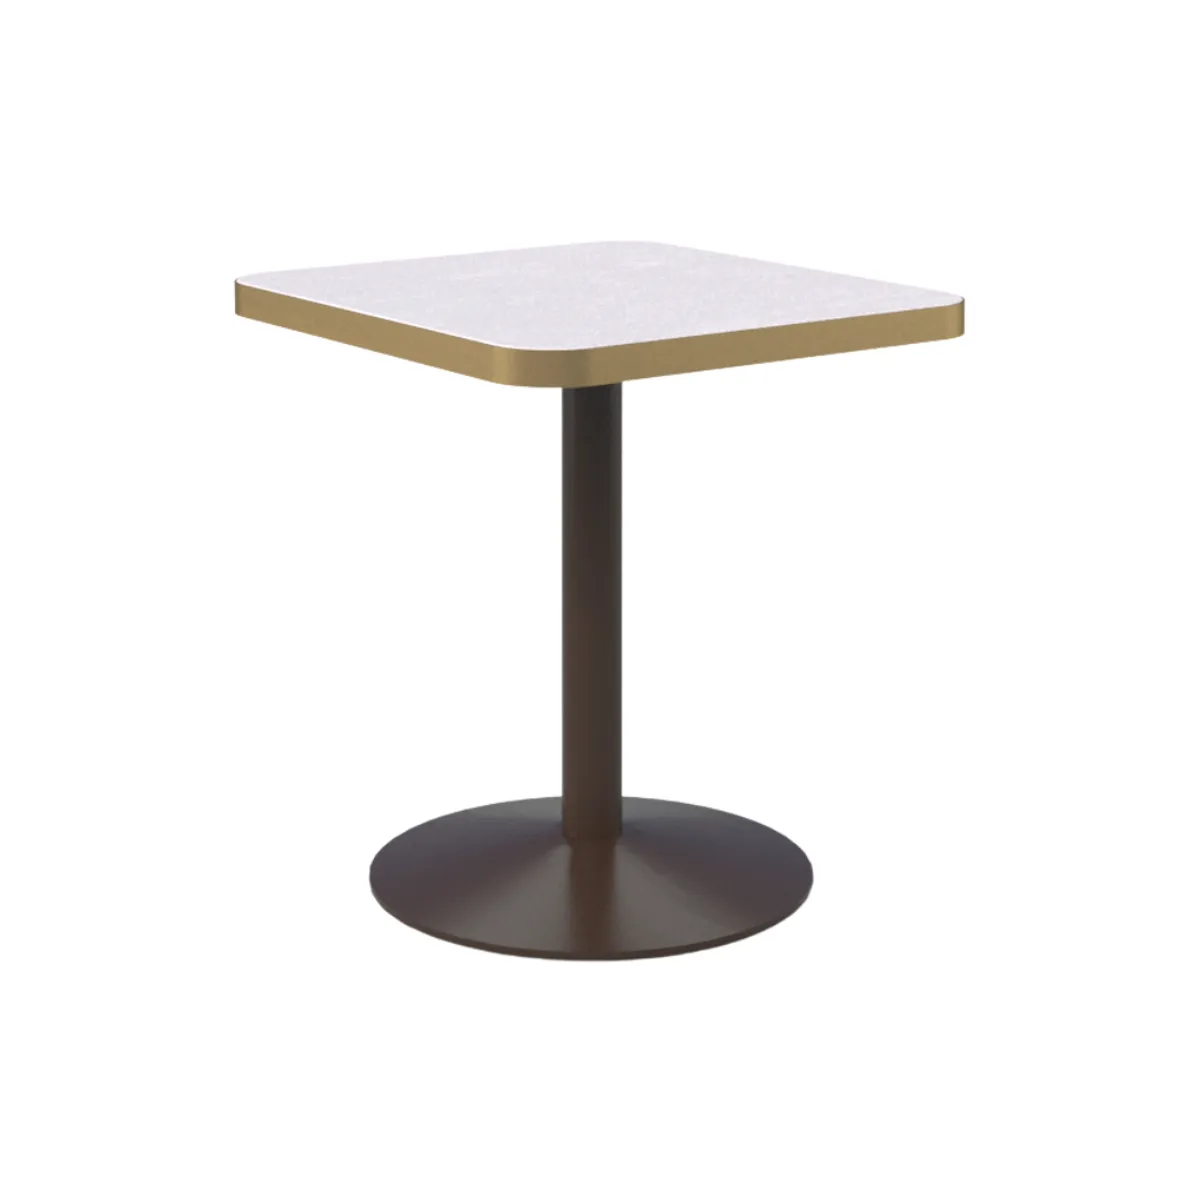 Gouqi square dining table 3